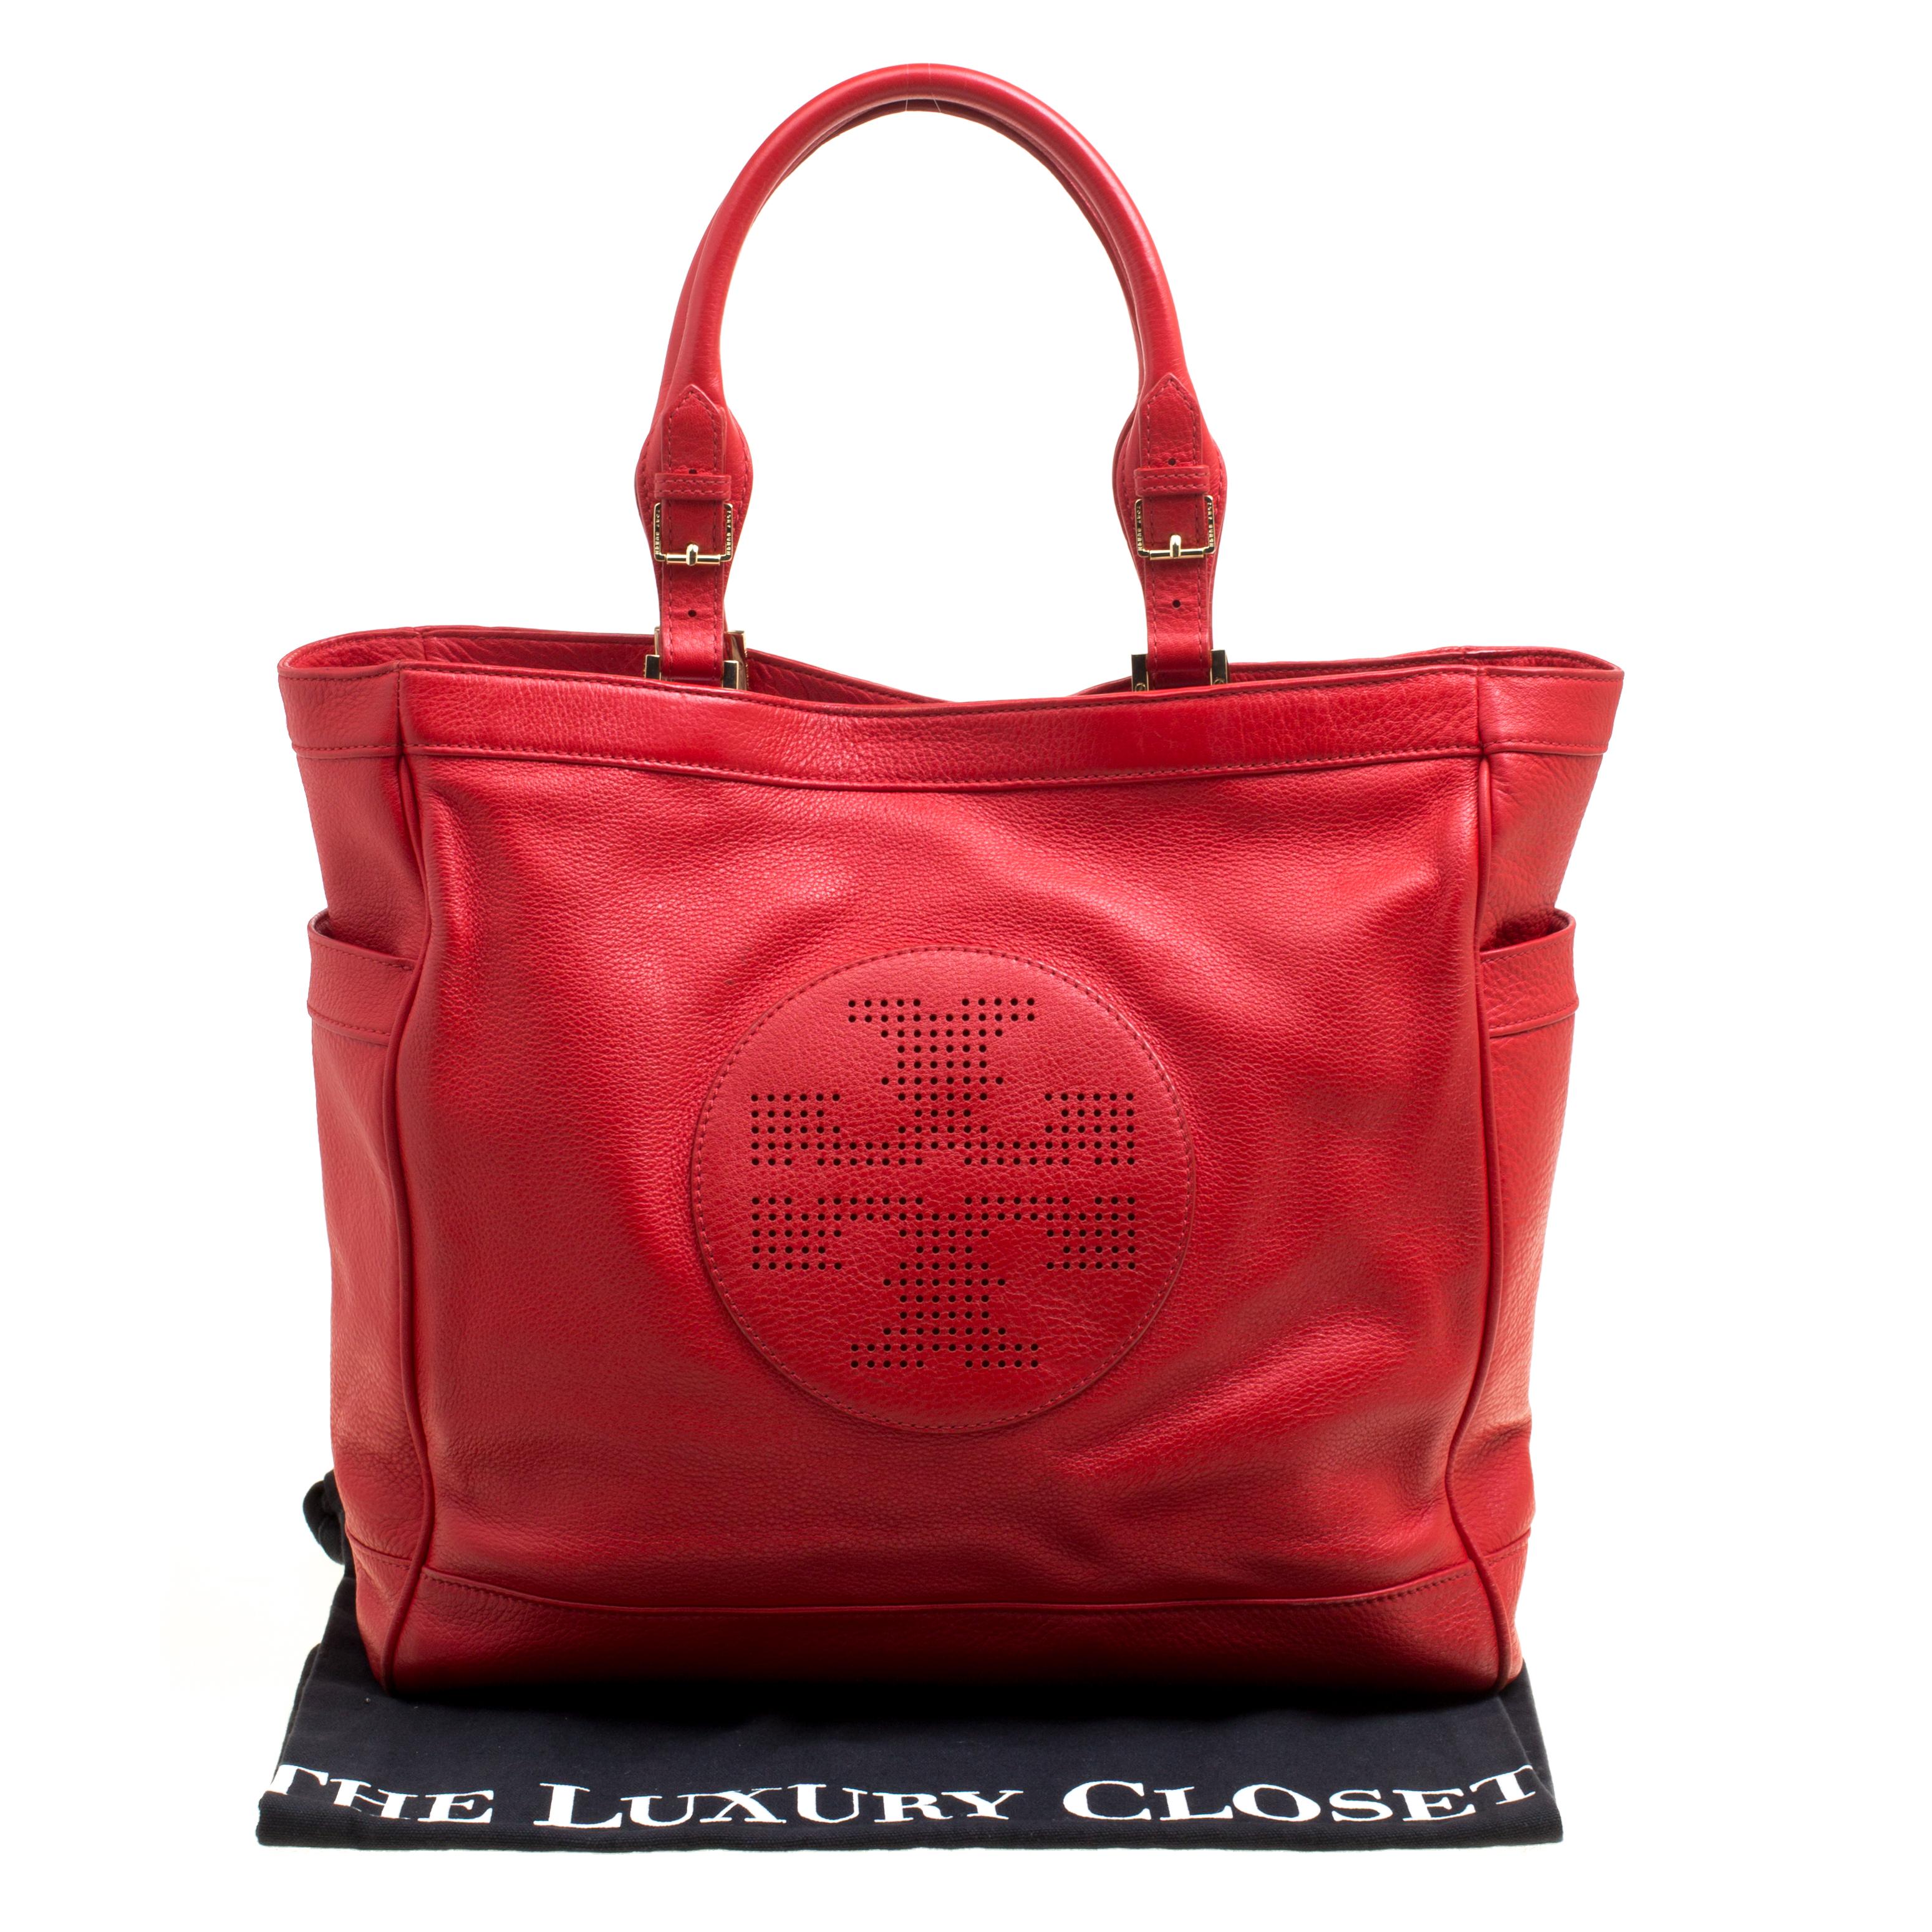 Tory Burch Red Leather Tote 4